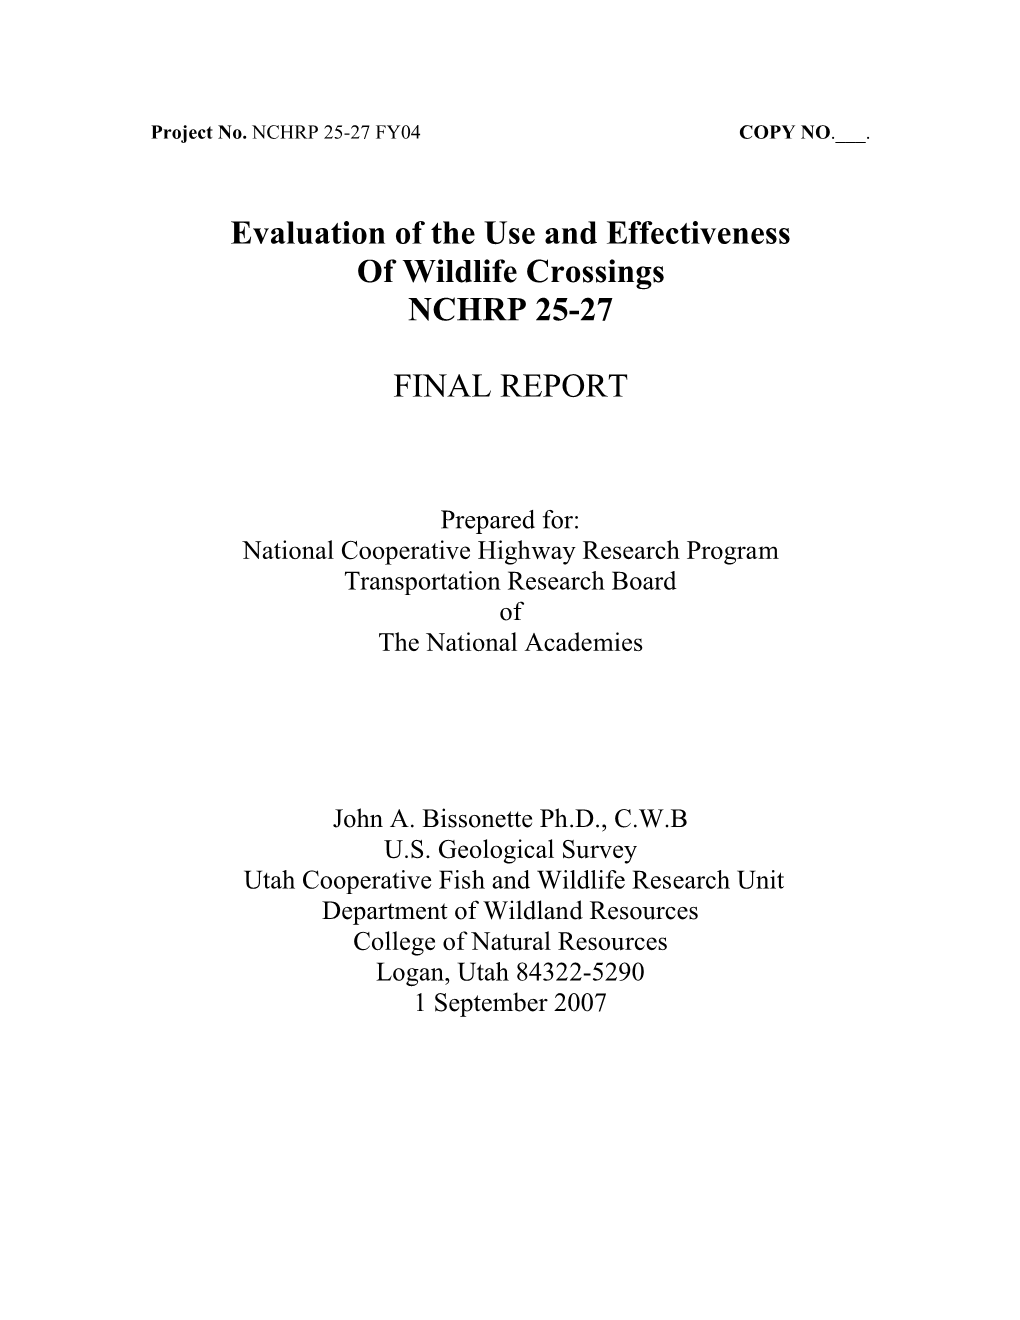 Evaluation of the Use and Effectiveness of Wildlife Crossings NCHRP 25-27